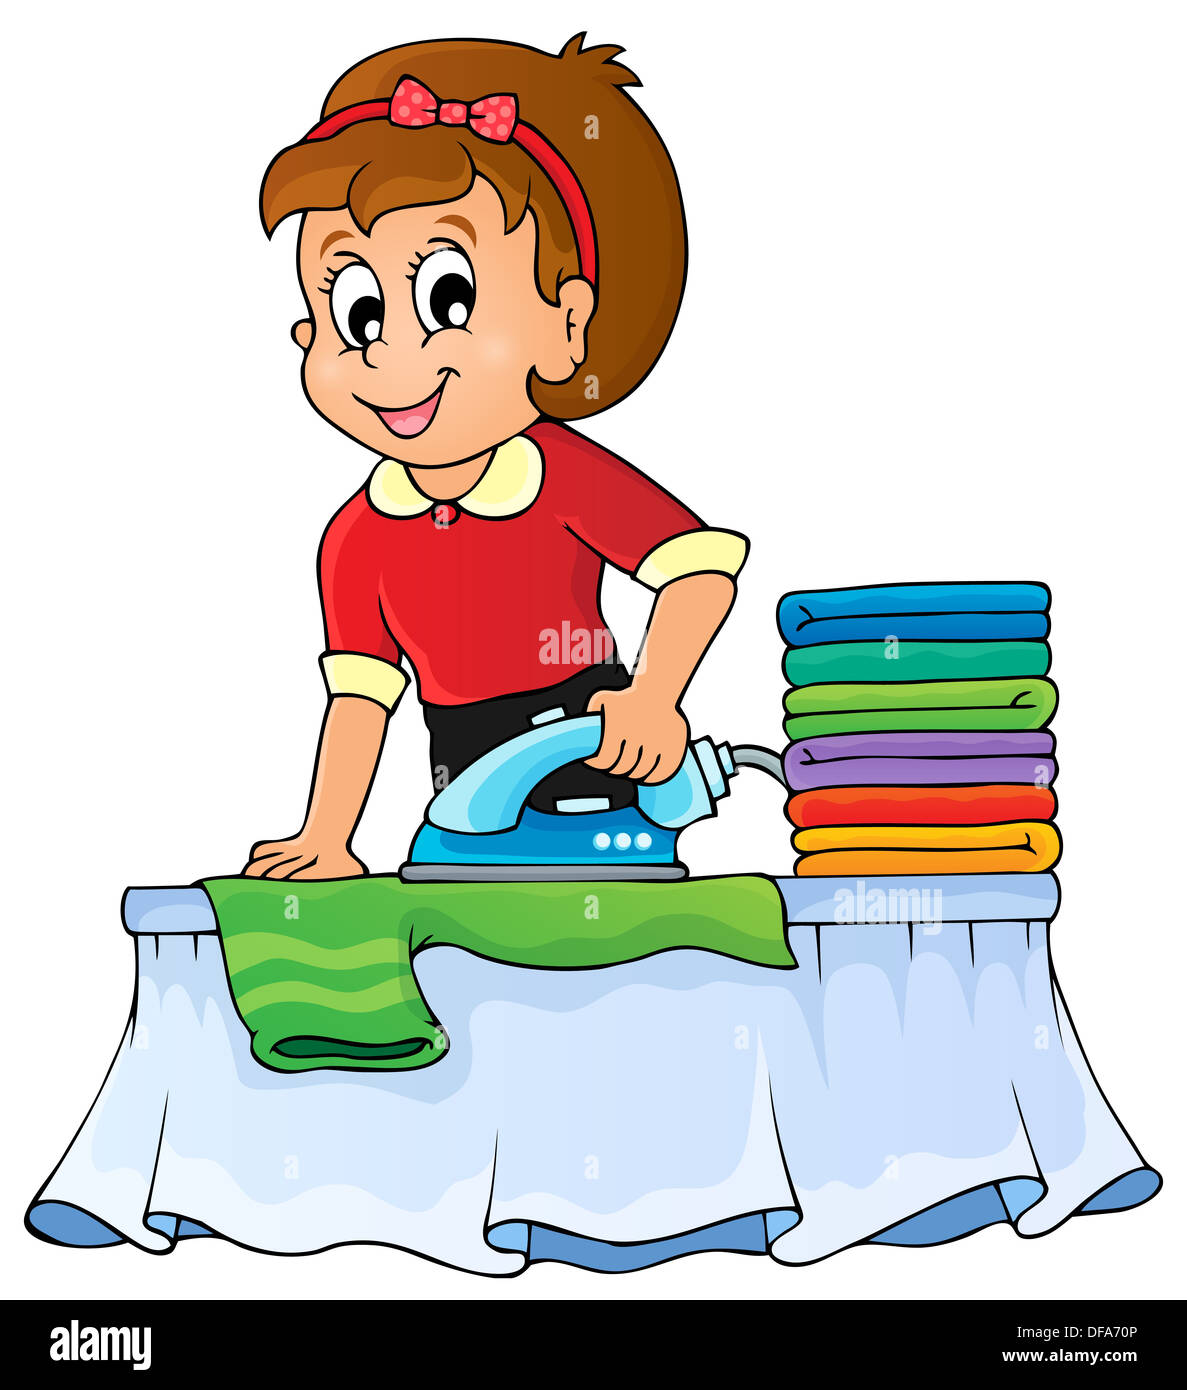 Housewife topic image 1 - picture illustration. Stock Photo